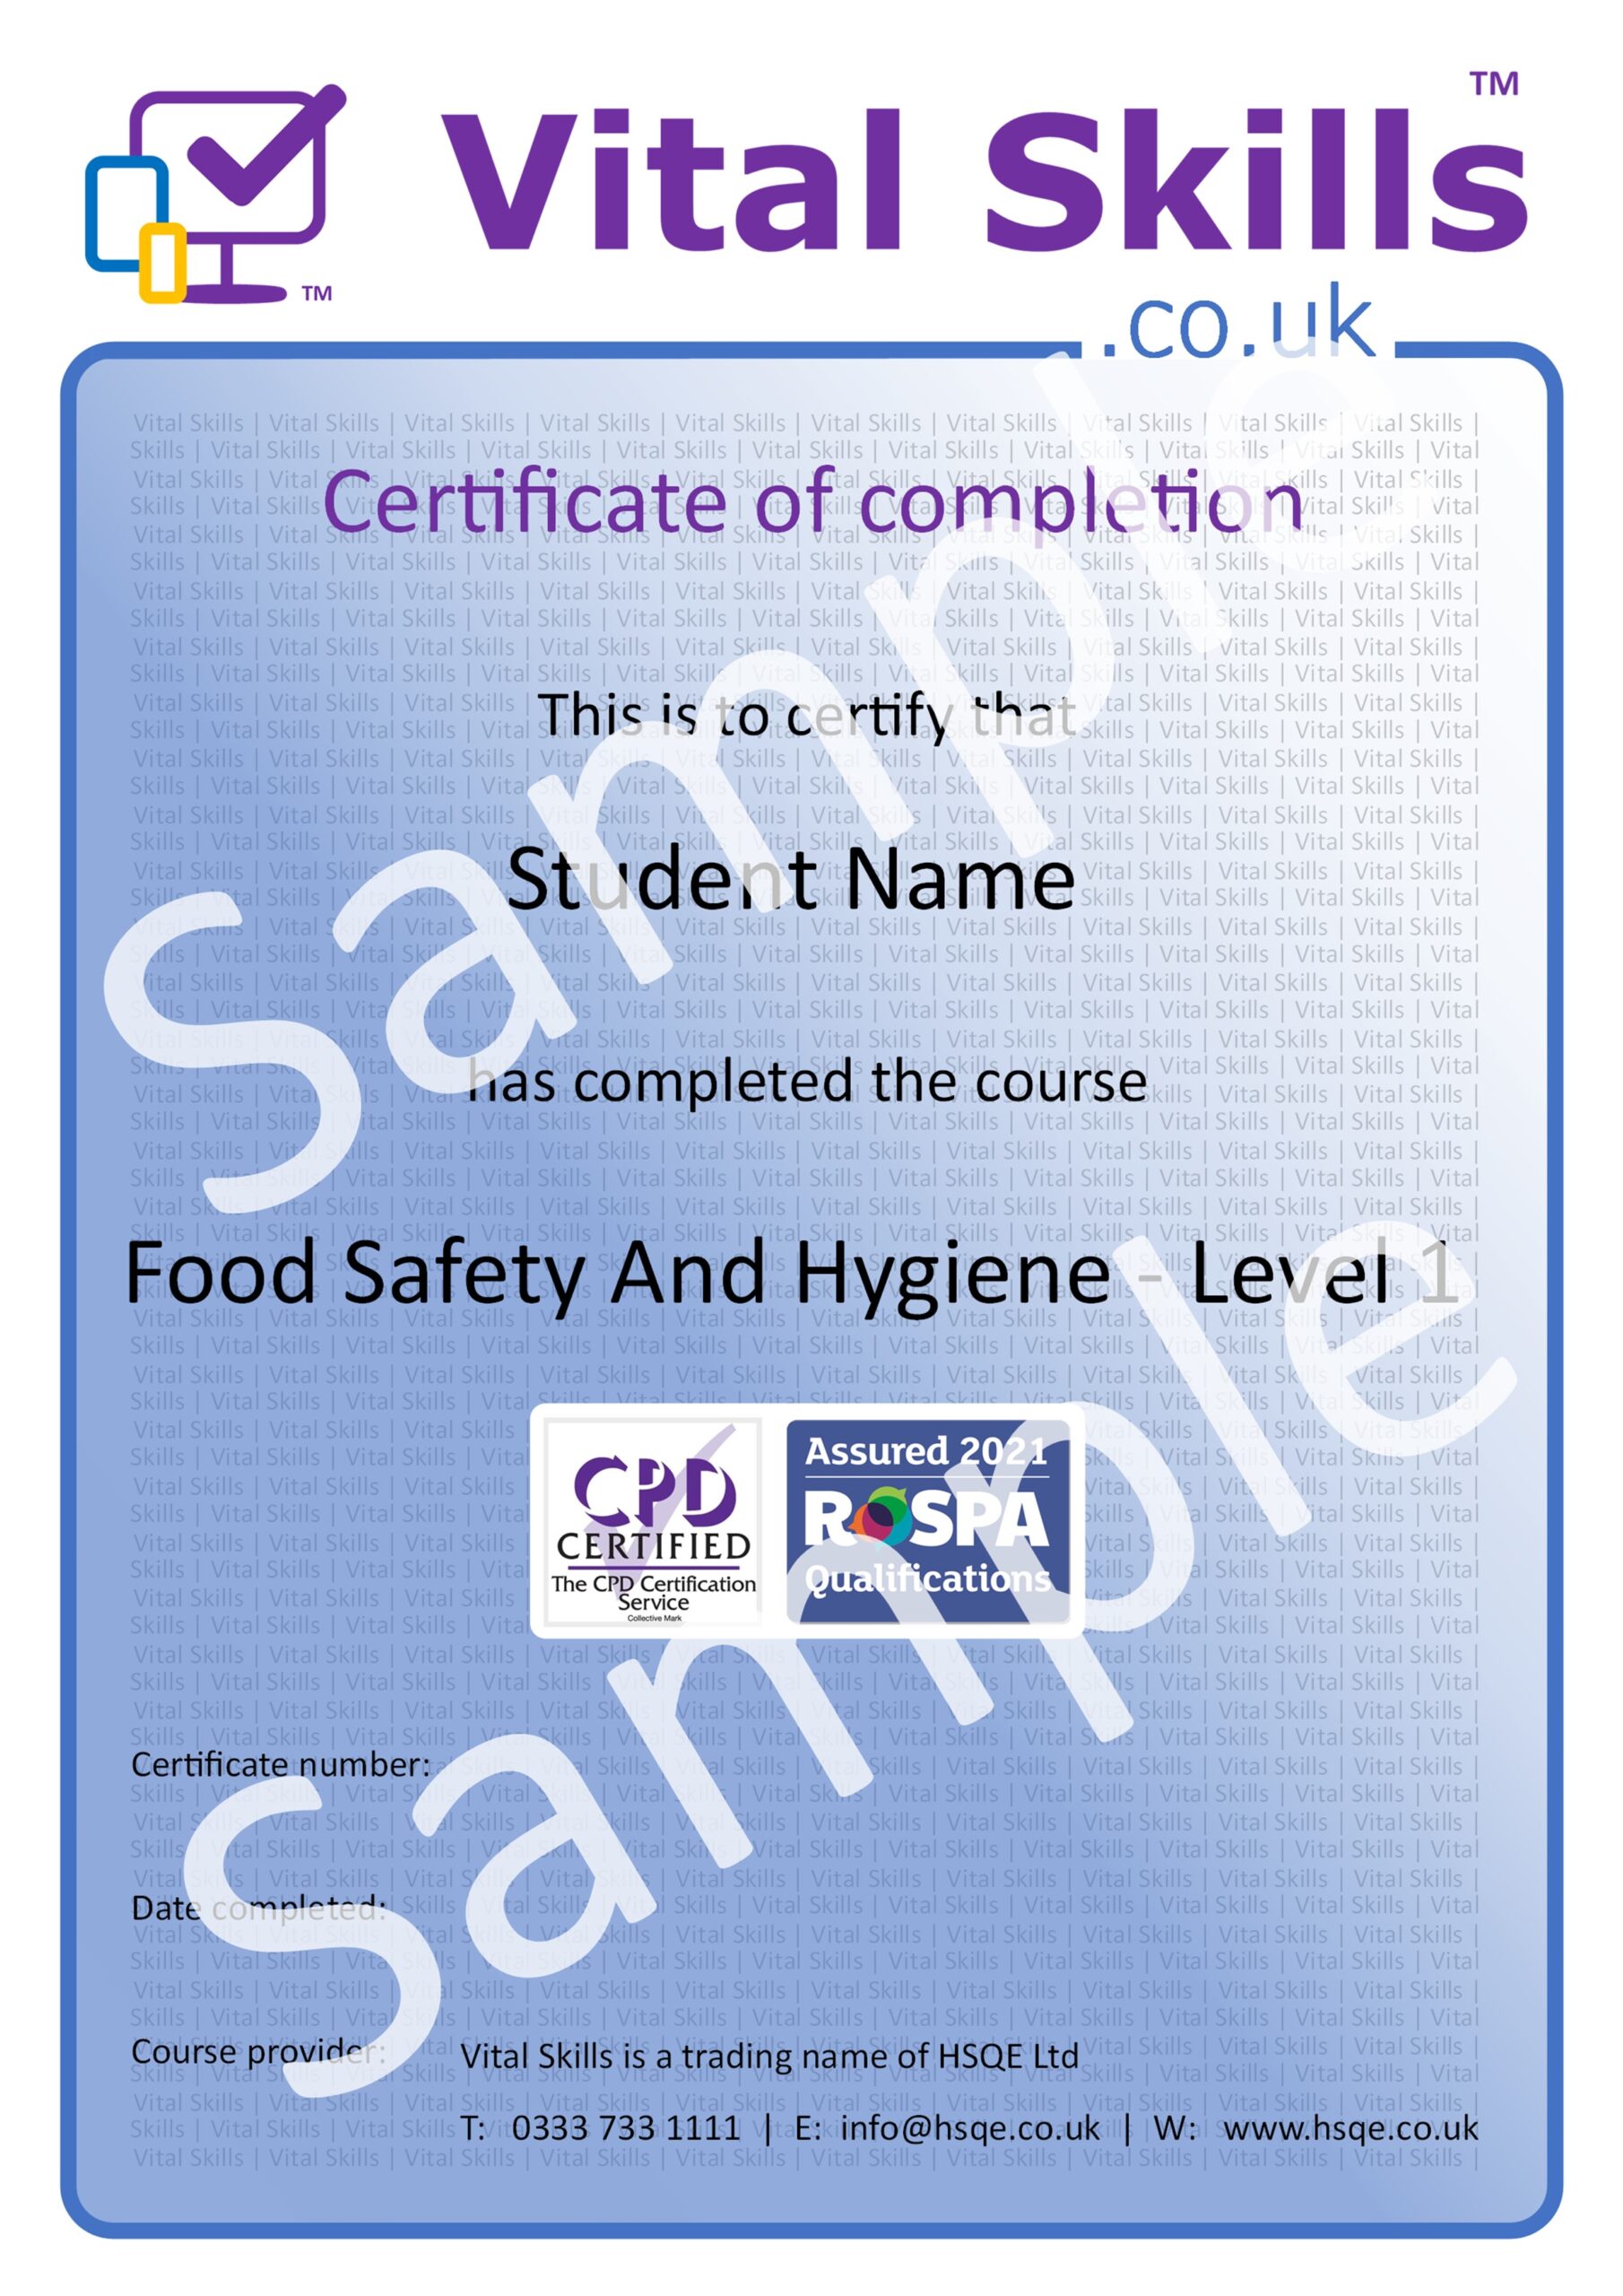 Food Safety And Hygiene - Level 1 Online Training Course Certificate HSQE Vital Skills